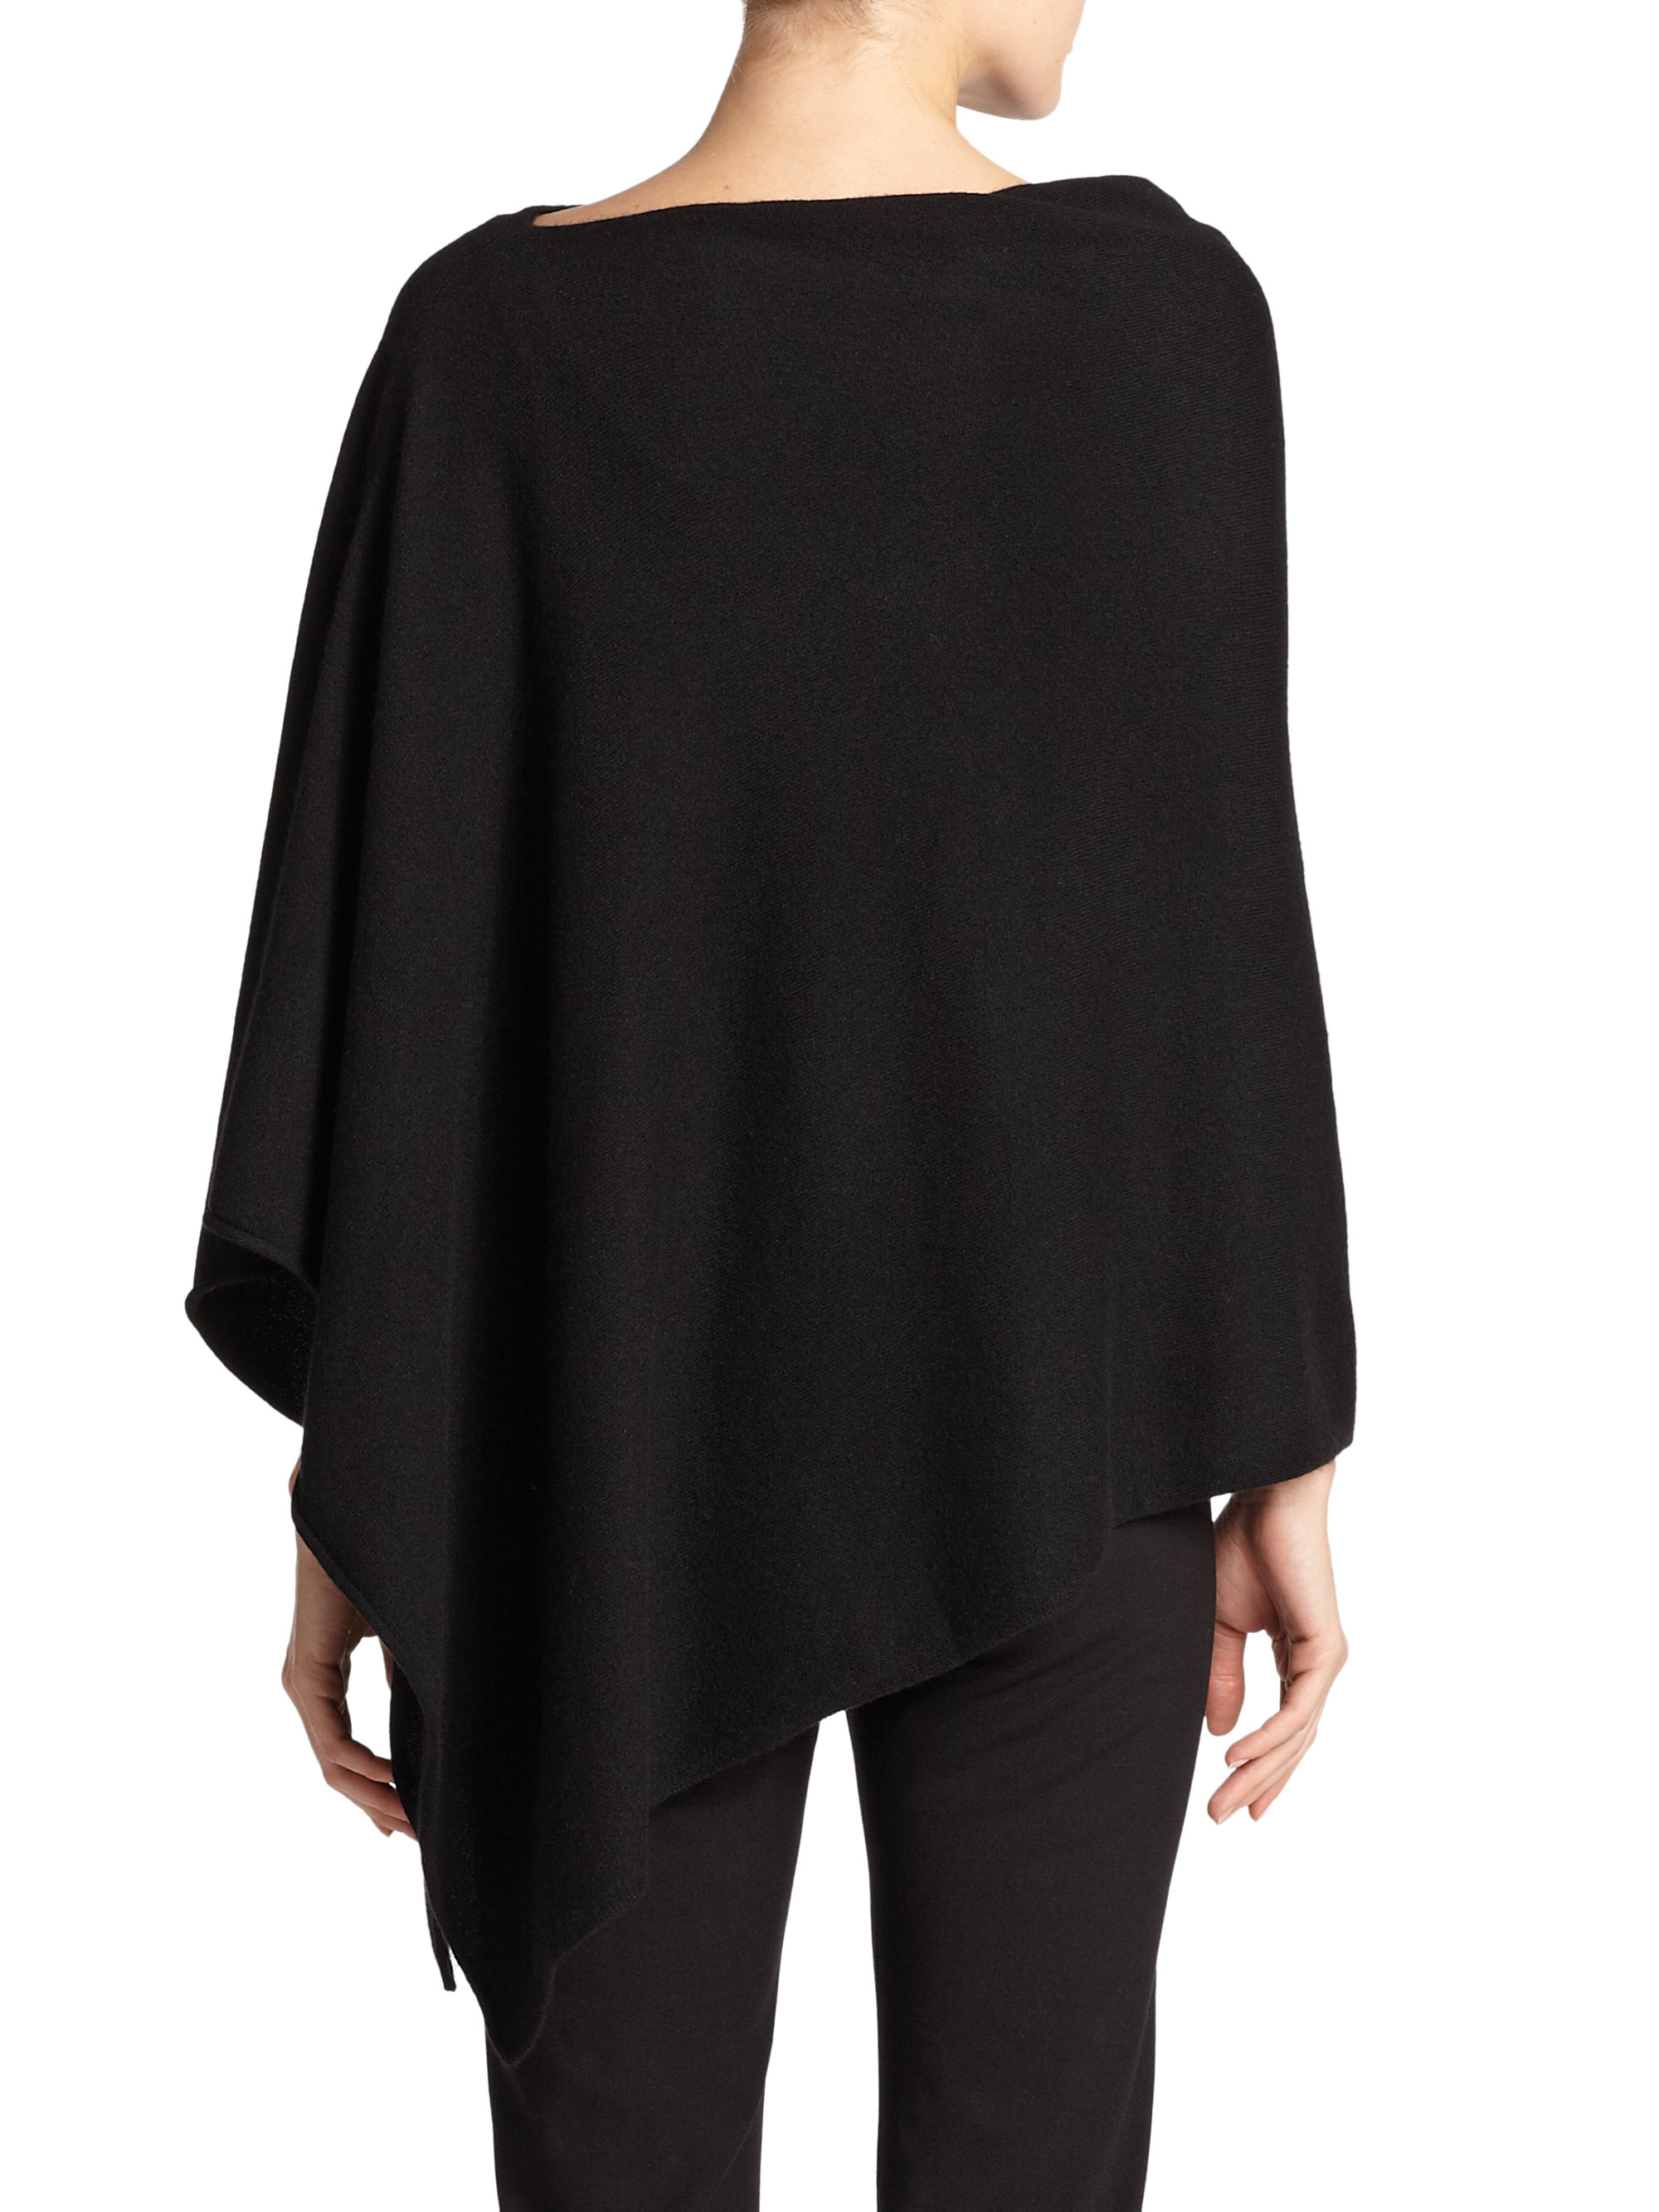 Lyst - Eileen Fisher Cashmere Poncho in Black